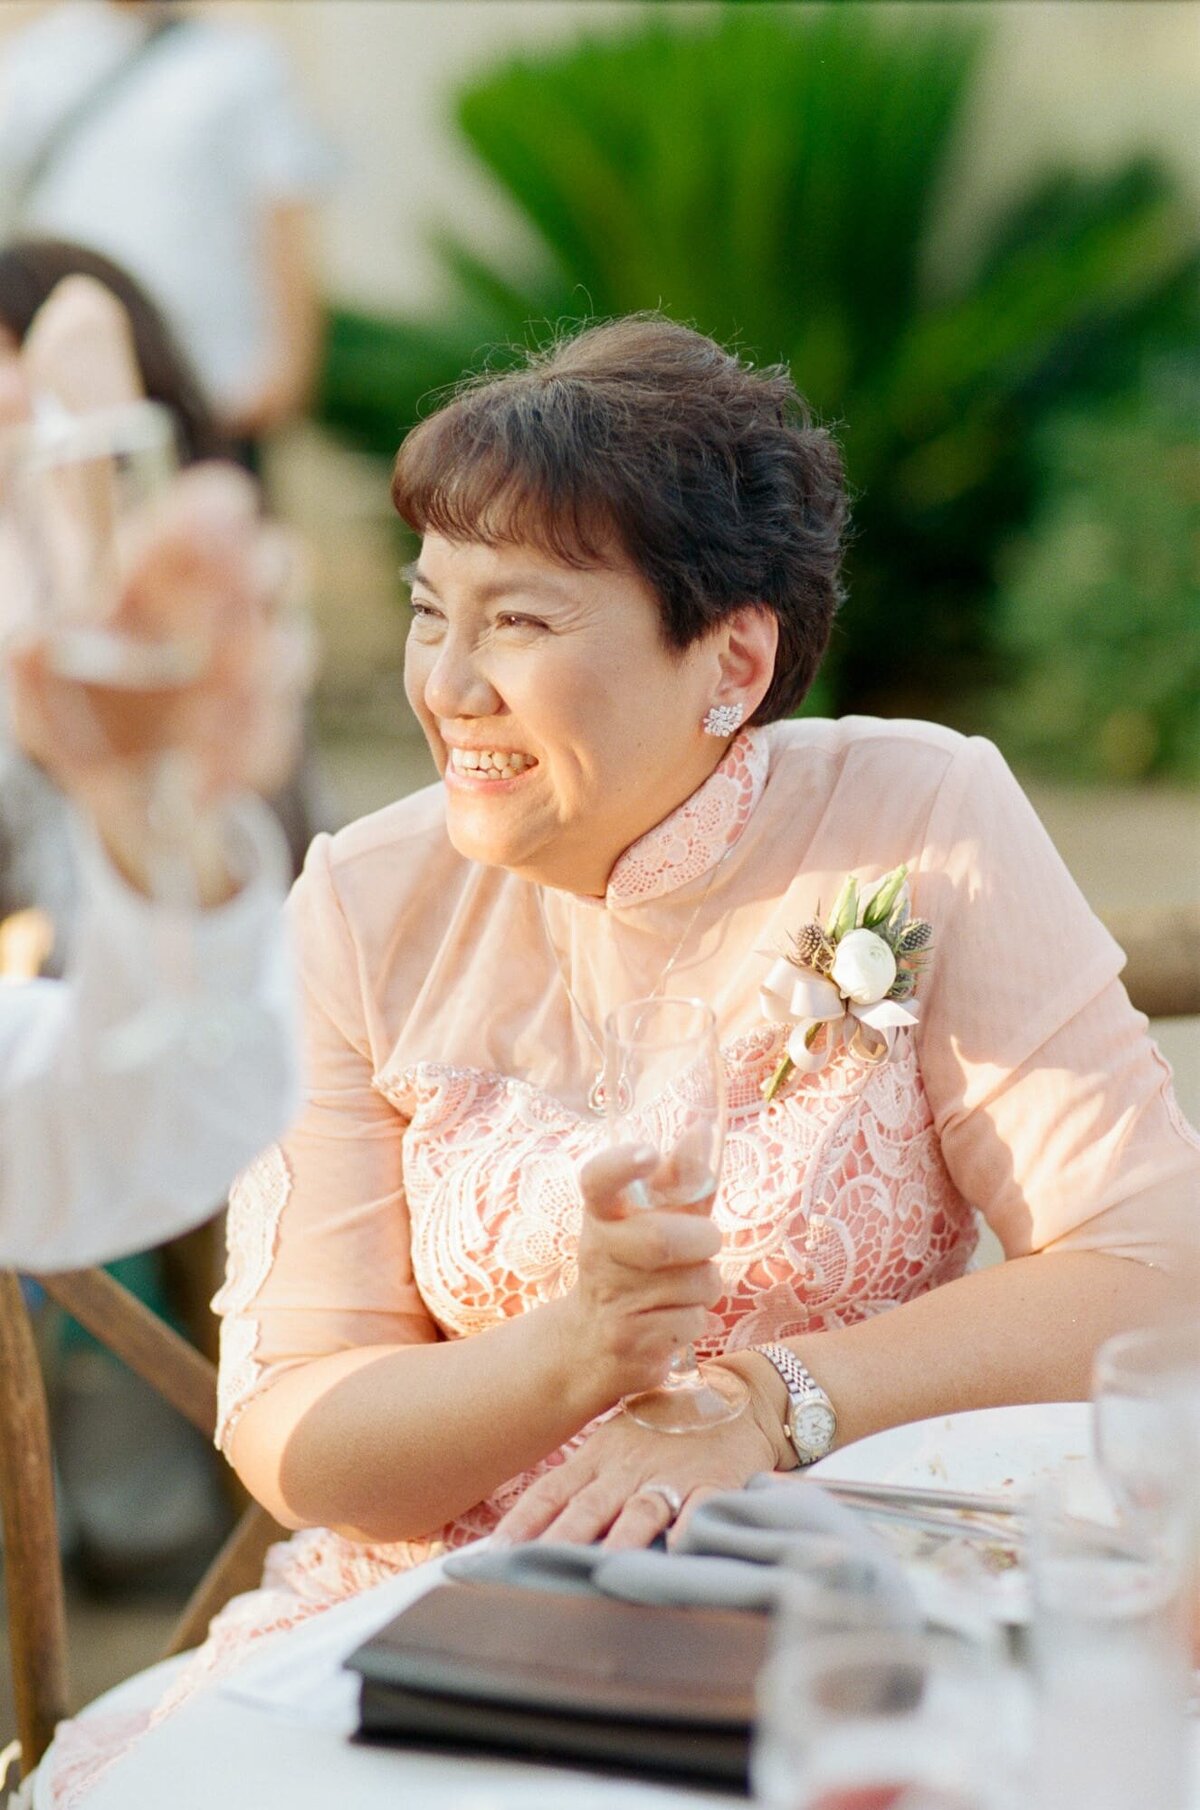 Mother of the bridegroom in pink attire watches intently at her son's wedding.